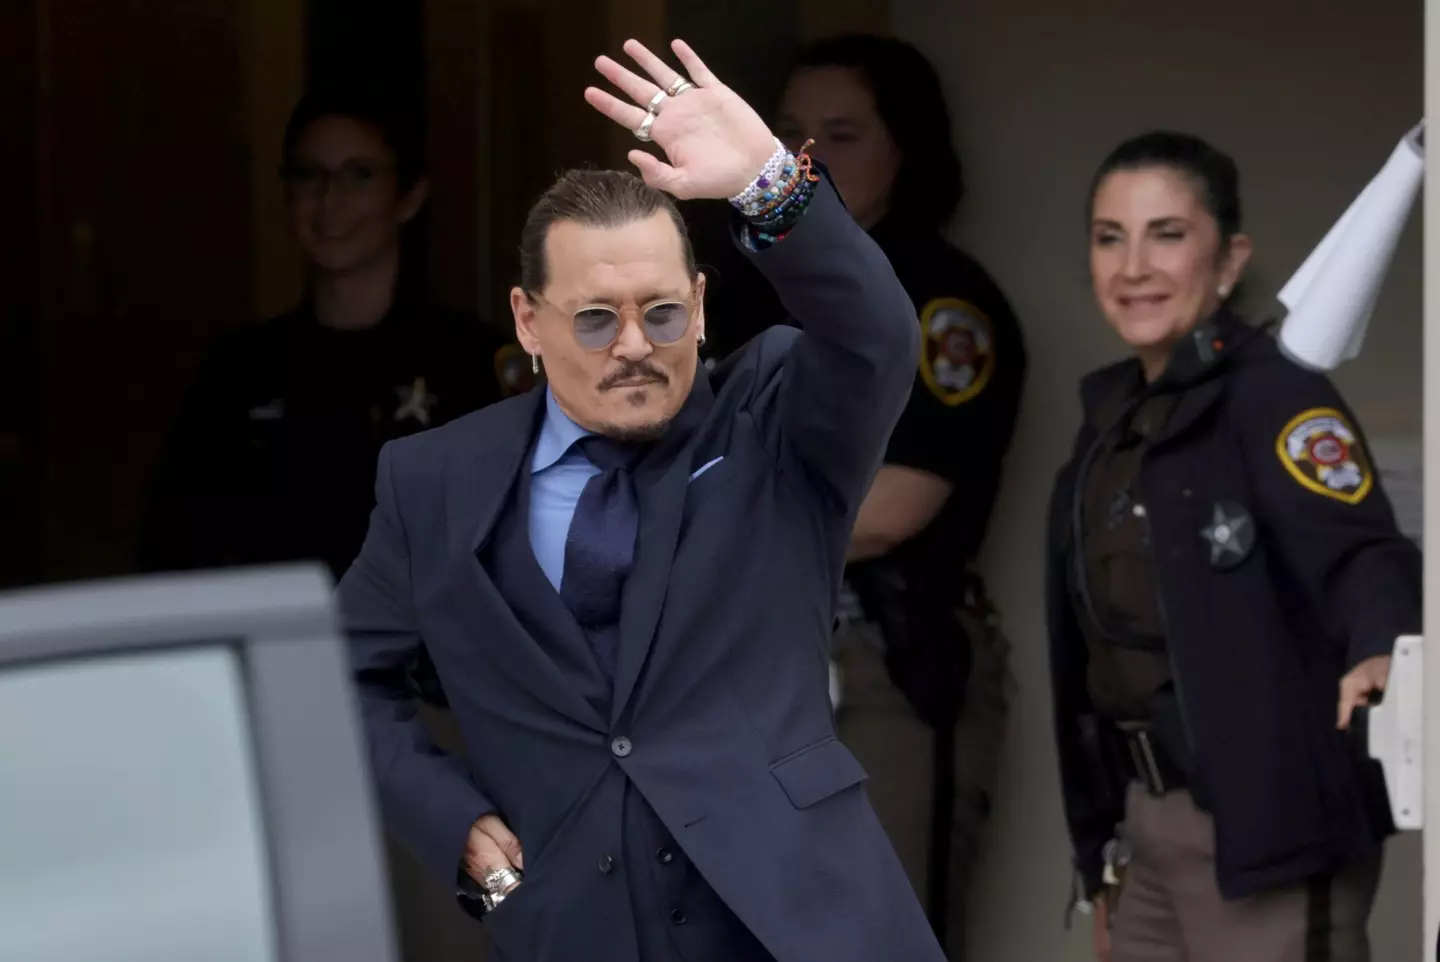 As the Depp-Heard trial draws to a close, onlookers have been left wondering why the trial is taking place in Fairfax, Virginia.